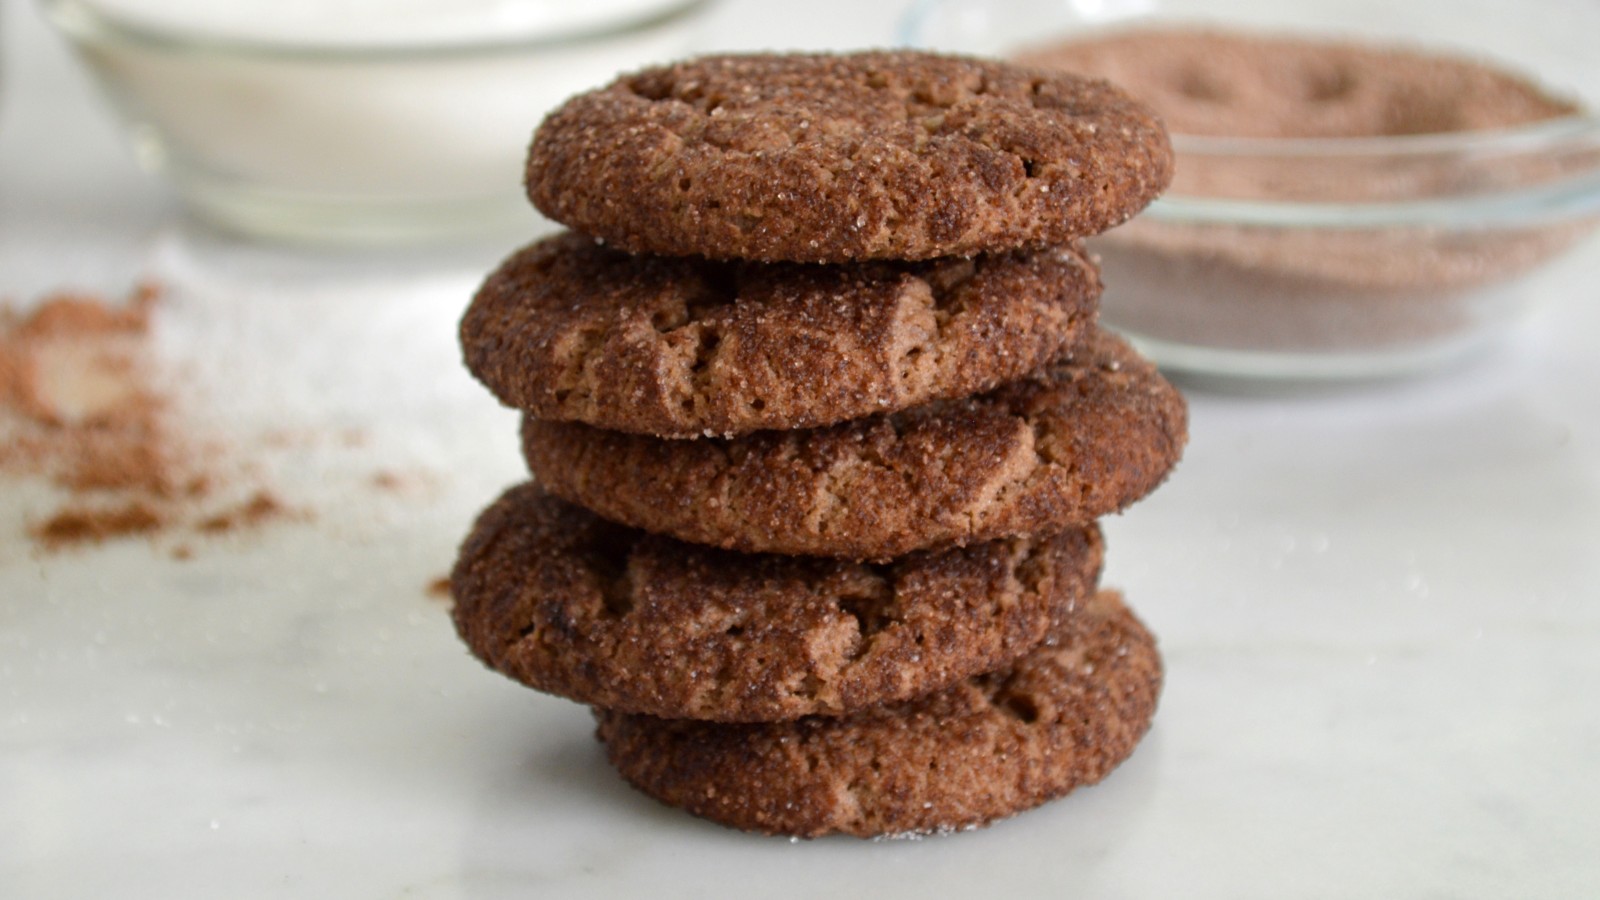 Image of Chocolate Snickerdoodles